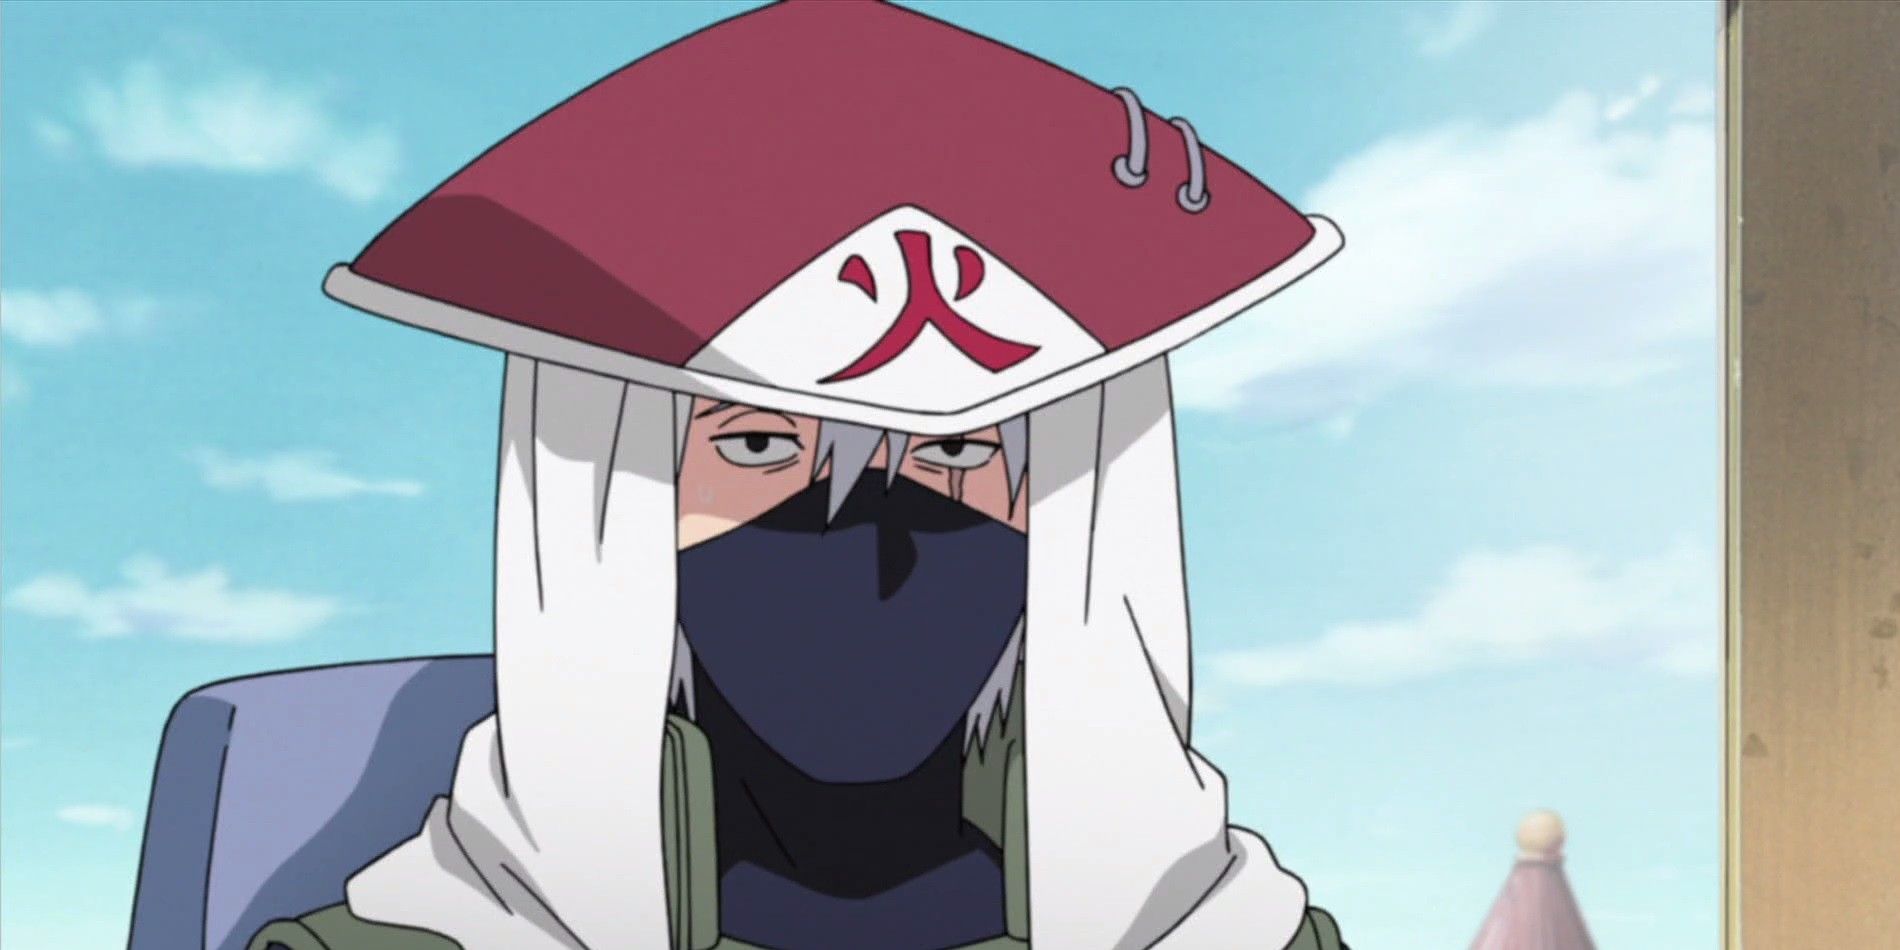 10 Unpopular Opinions About Naruto According To Reddit